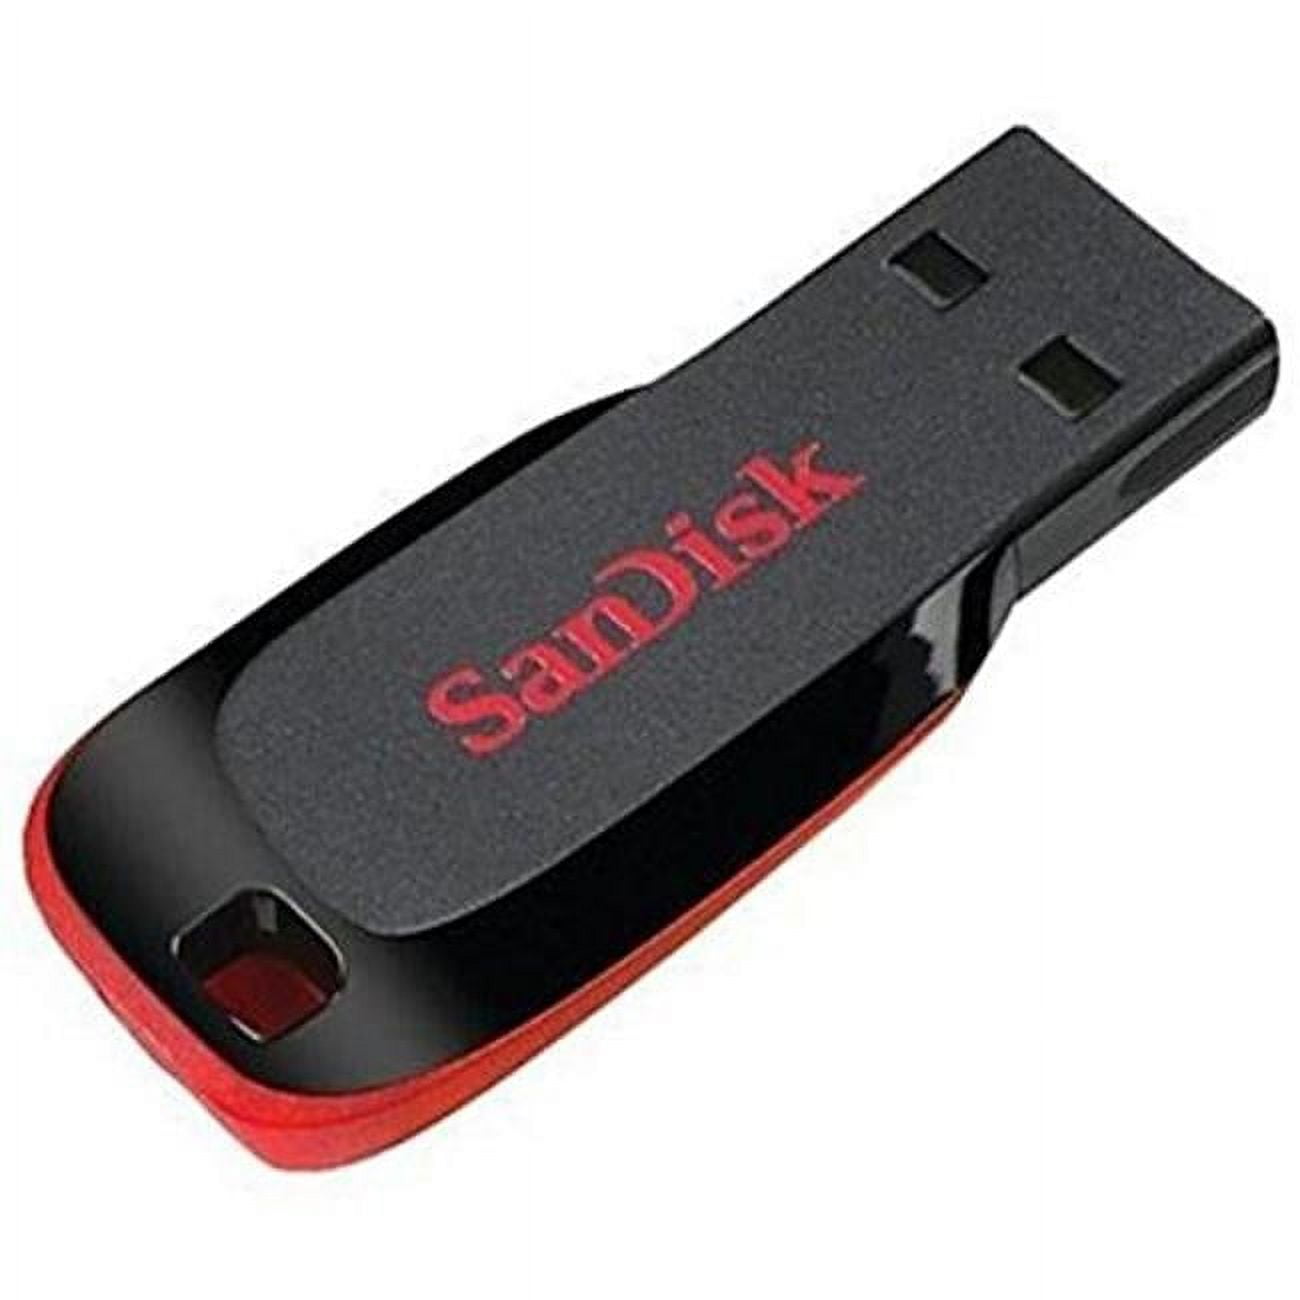 Picture of SanDisk SDCZ50-128G-A46 128 GB Cruzer Blade USB Flash Drive